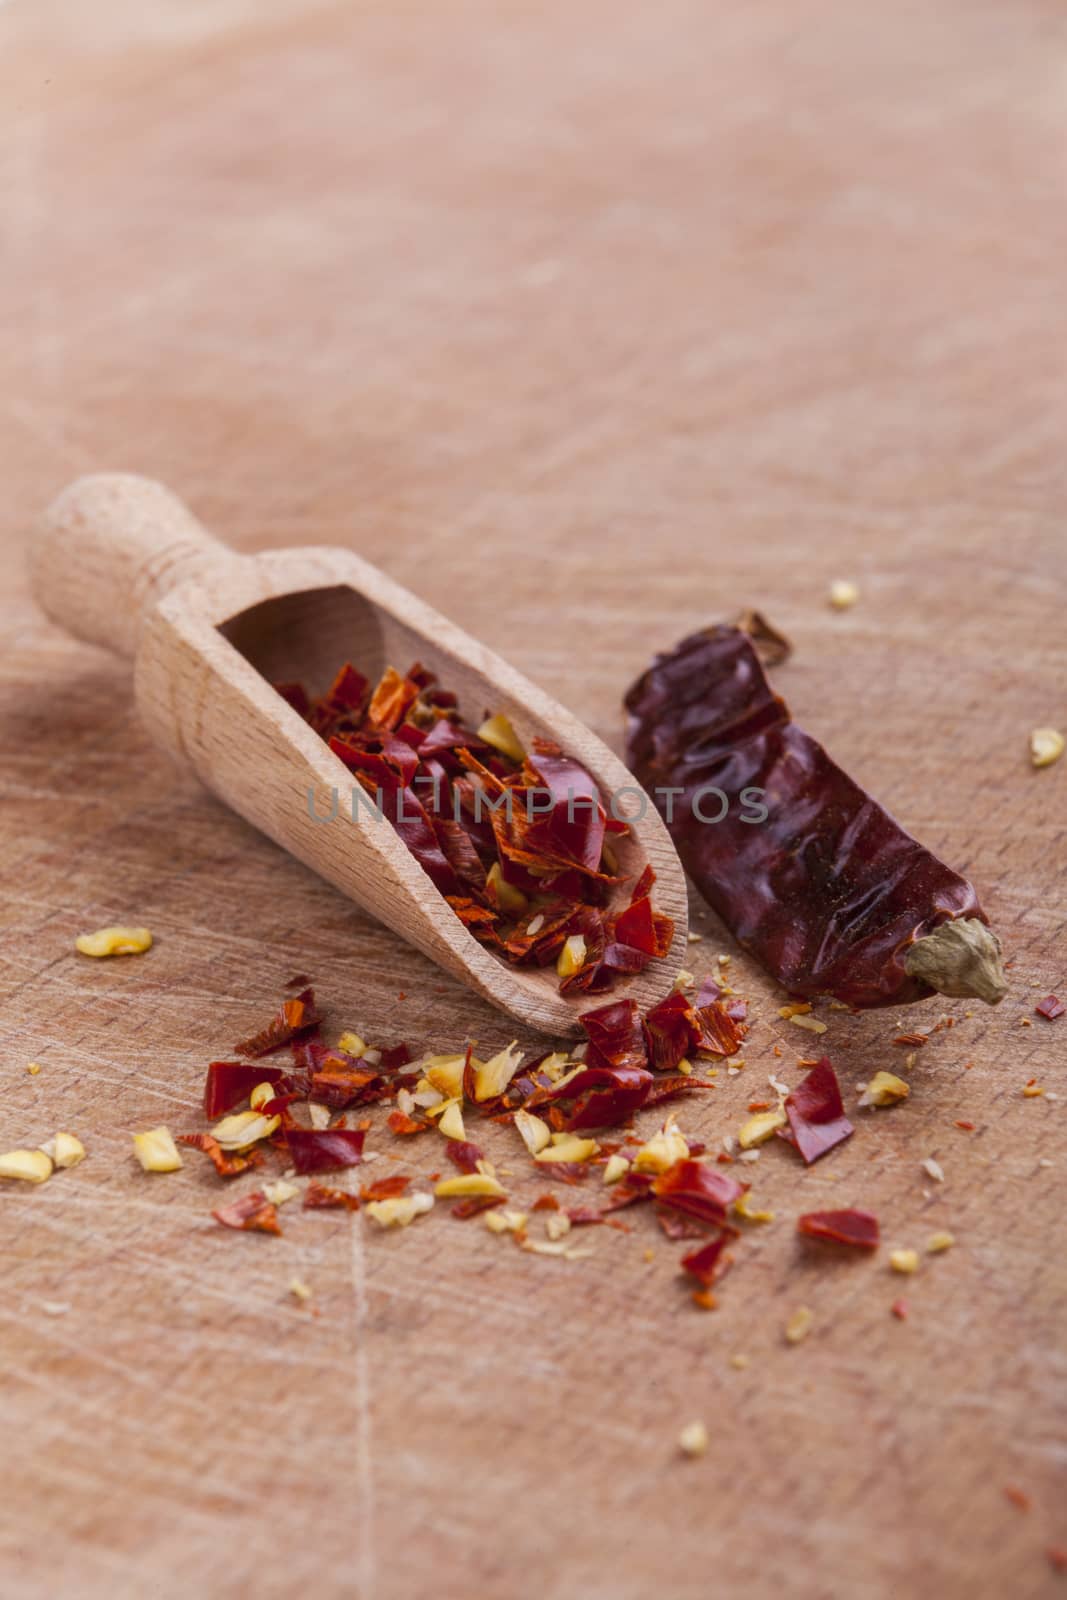 Dry red hot chilli peppers with wooden spoon on brown wood background